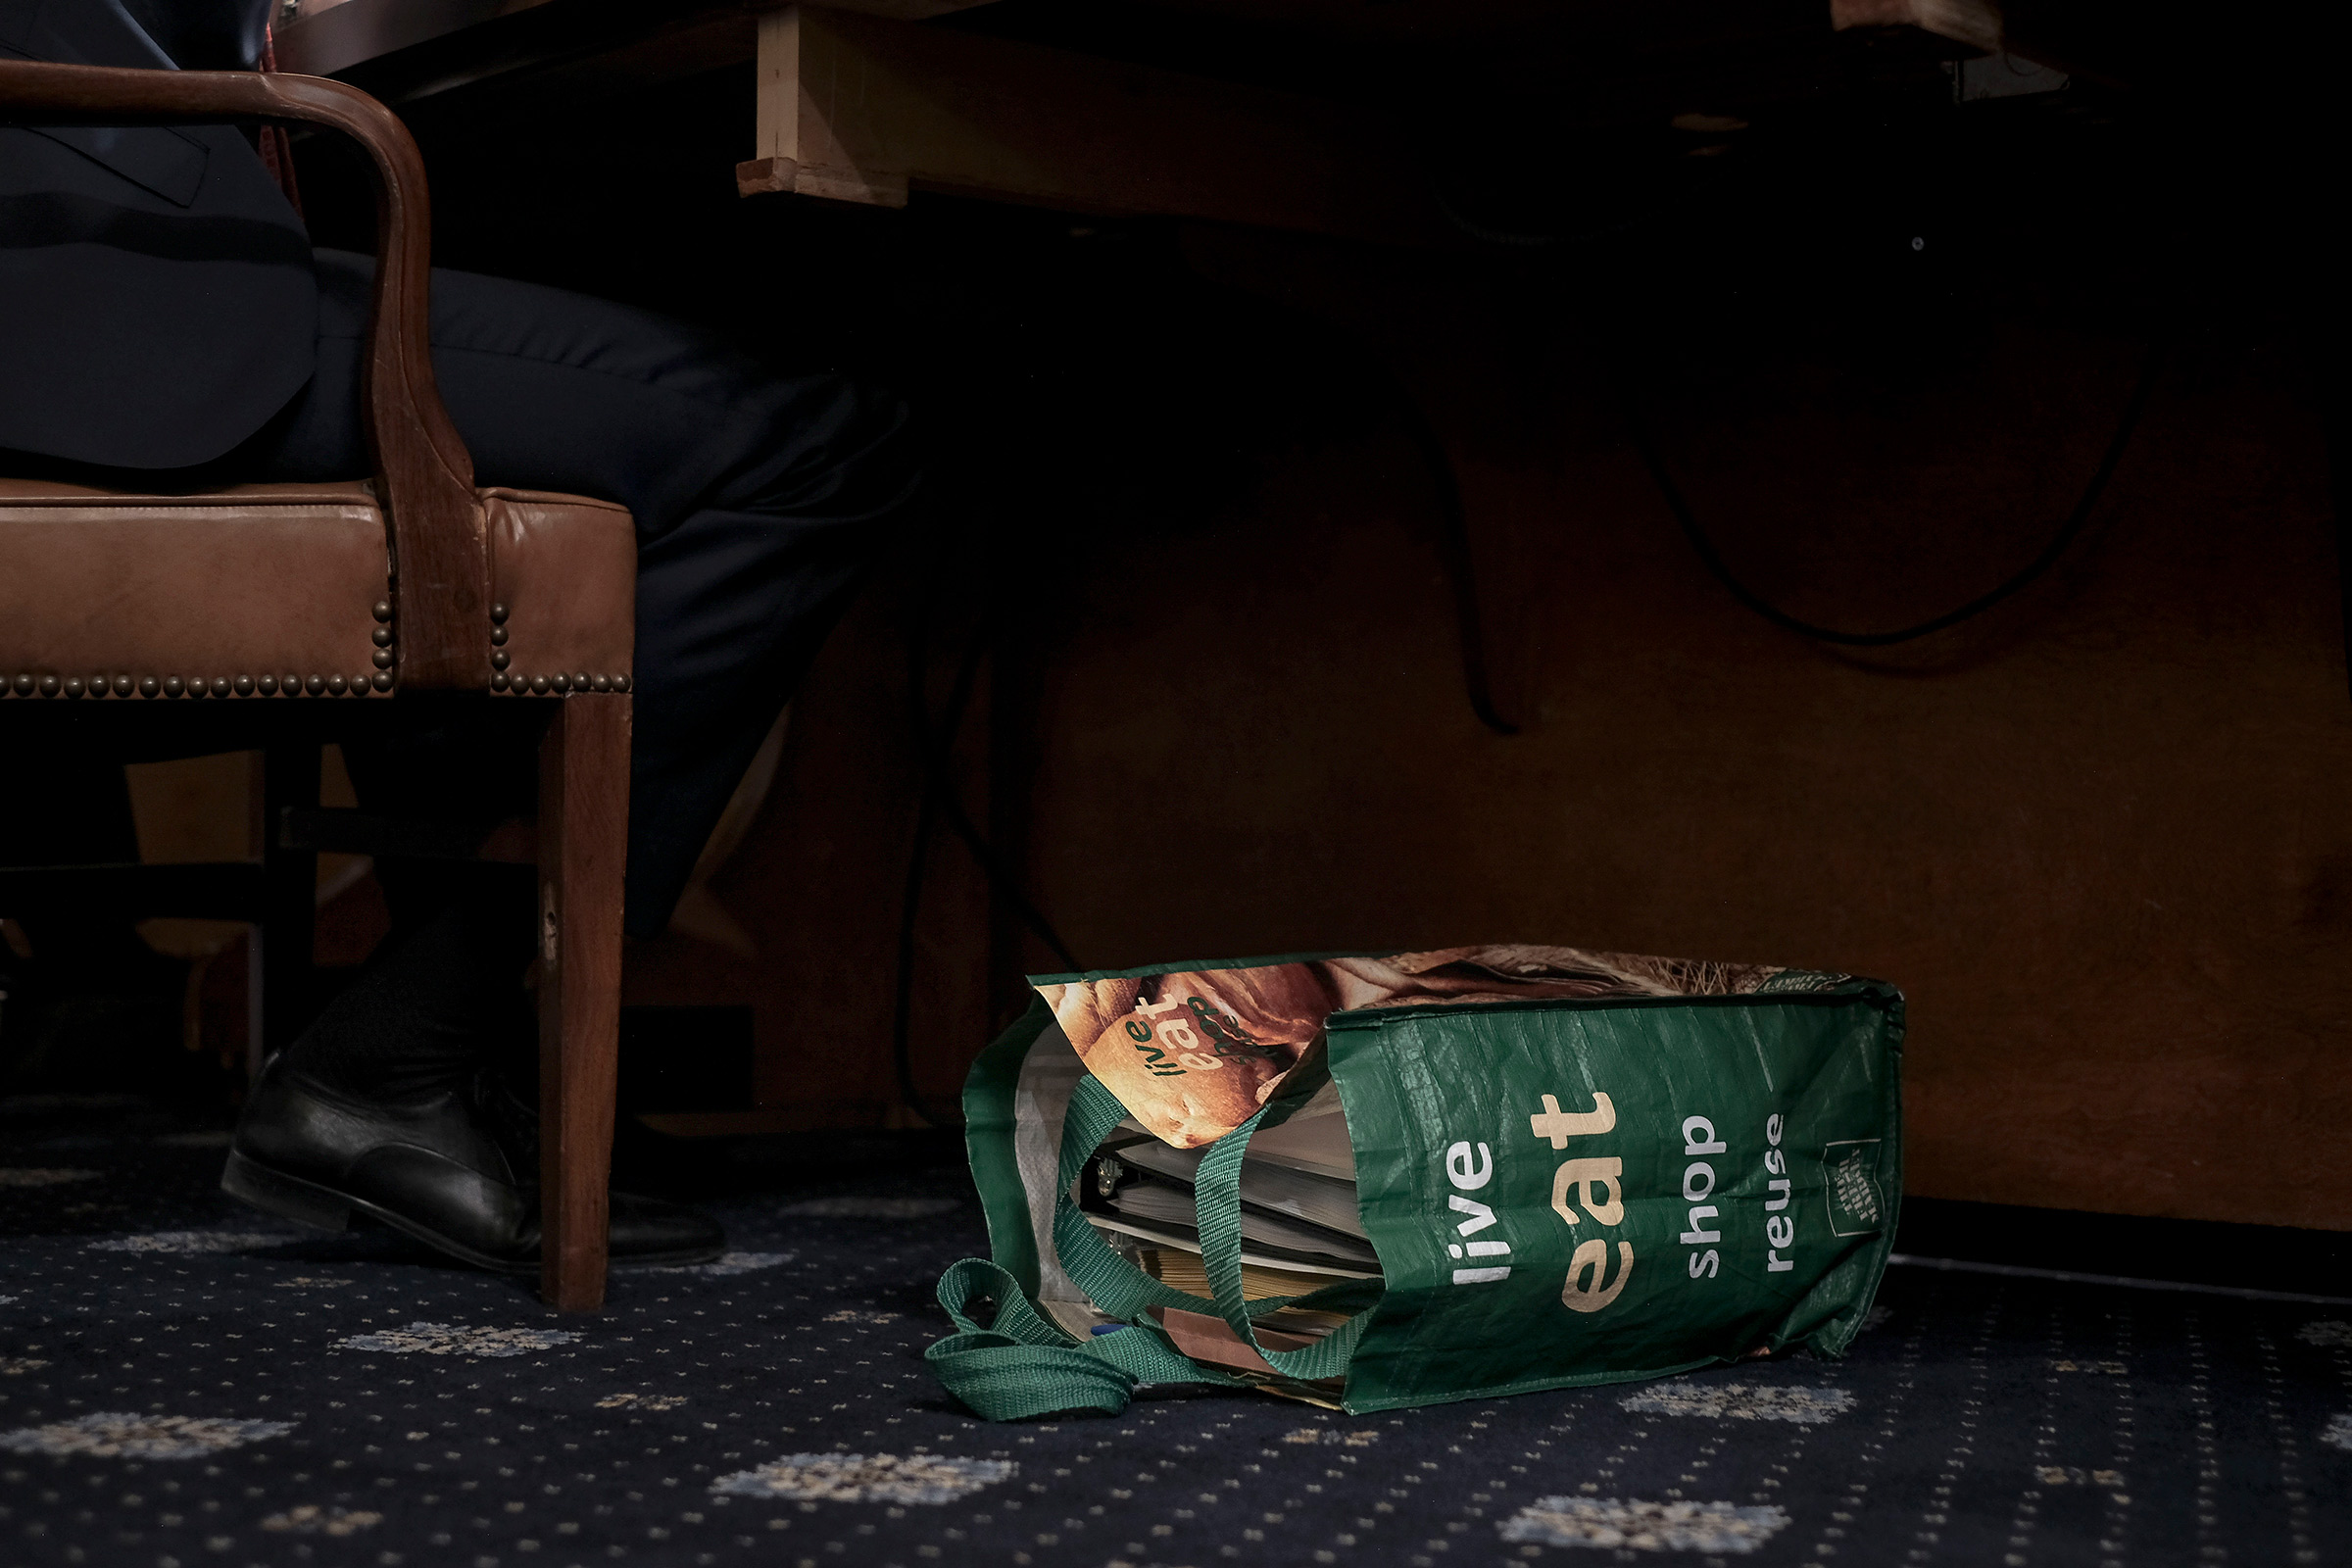 A reusable shopping bag filled with documents and notes sit at the feet of Stephen Castor, the Republican counsel to the Judiciary and Intelligence committee, at the beginning of the House Judiciary Committee hearing on the impeachment inquiry in Washington, D.C., on Dec. 9, 2019. (Gabriella Demczuk for TIME)